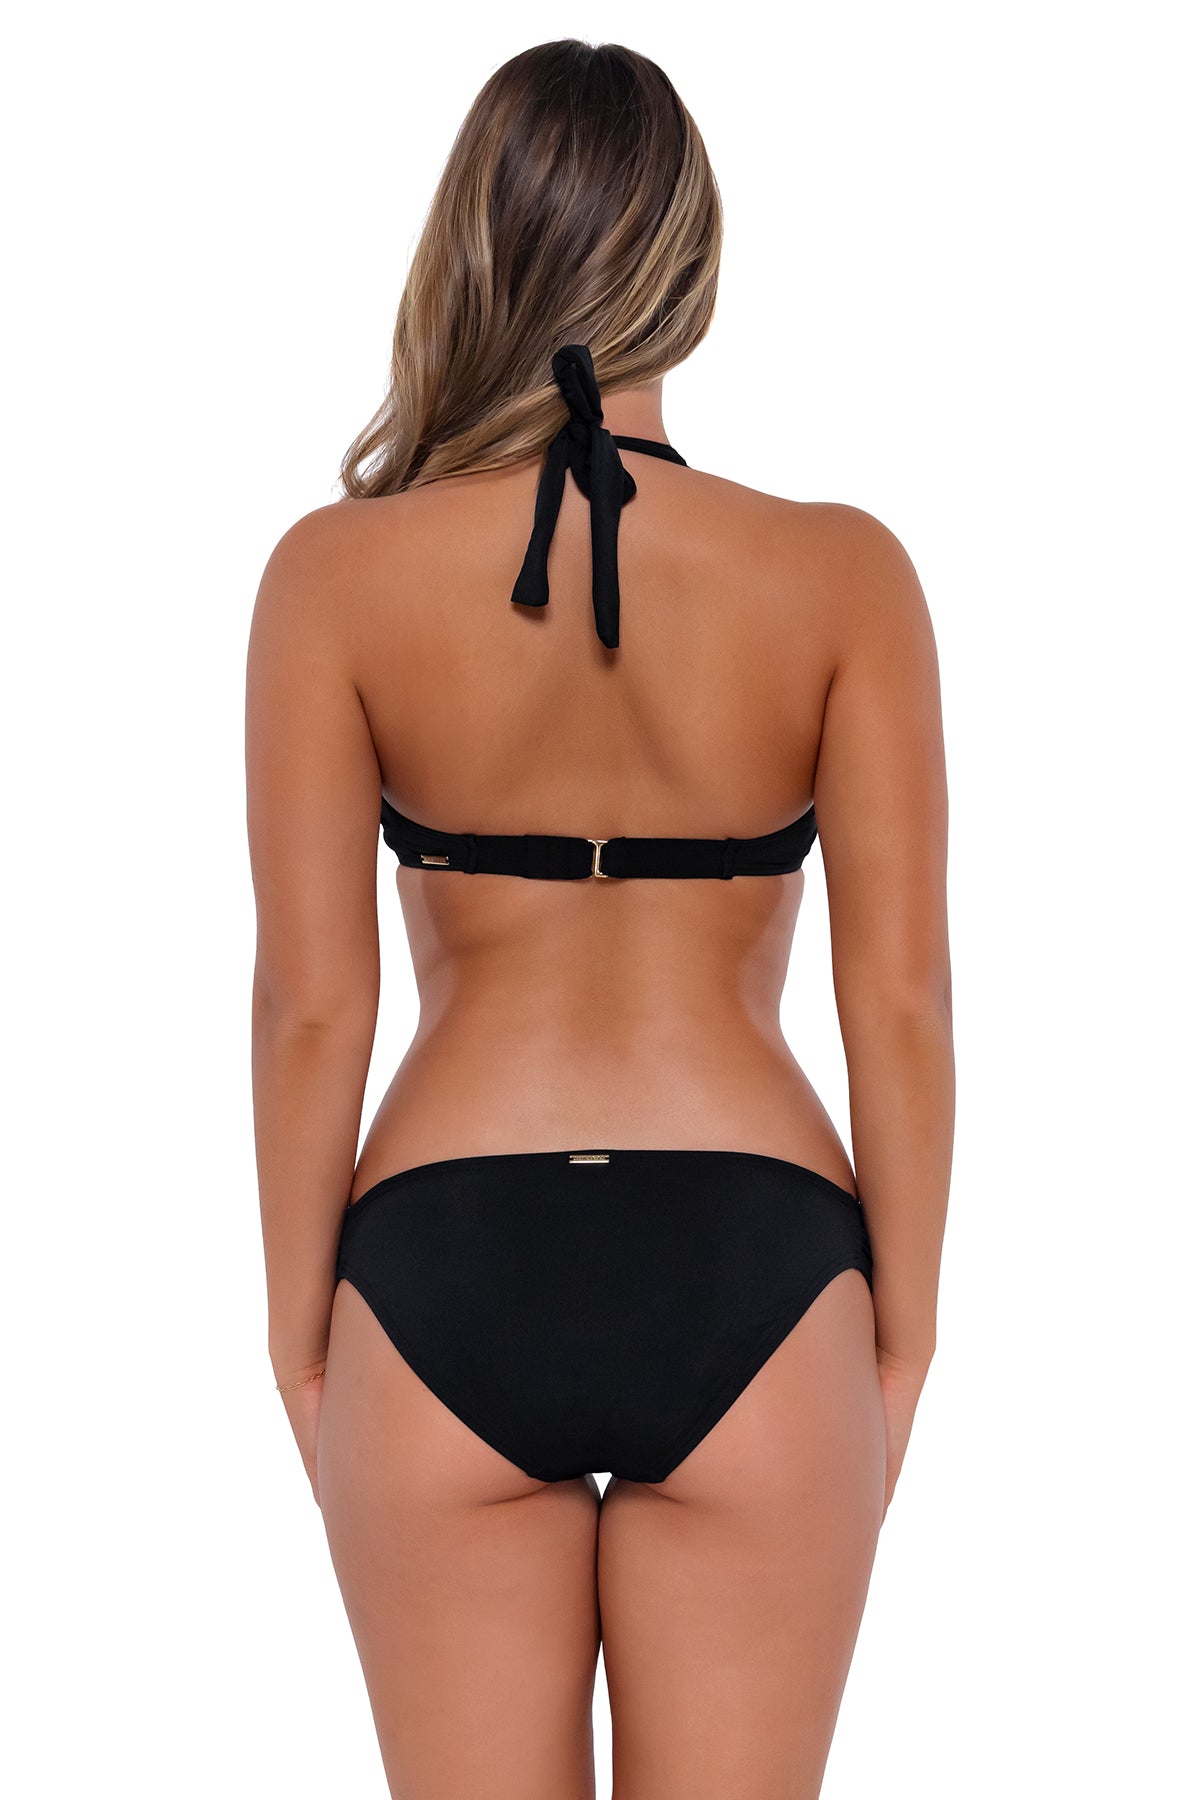 Back pose #1 of Taylor wearing Sunsets Black Muse Halter Top with matching Femme Fatale Hipster bikini bottom